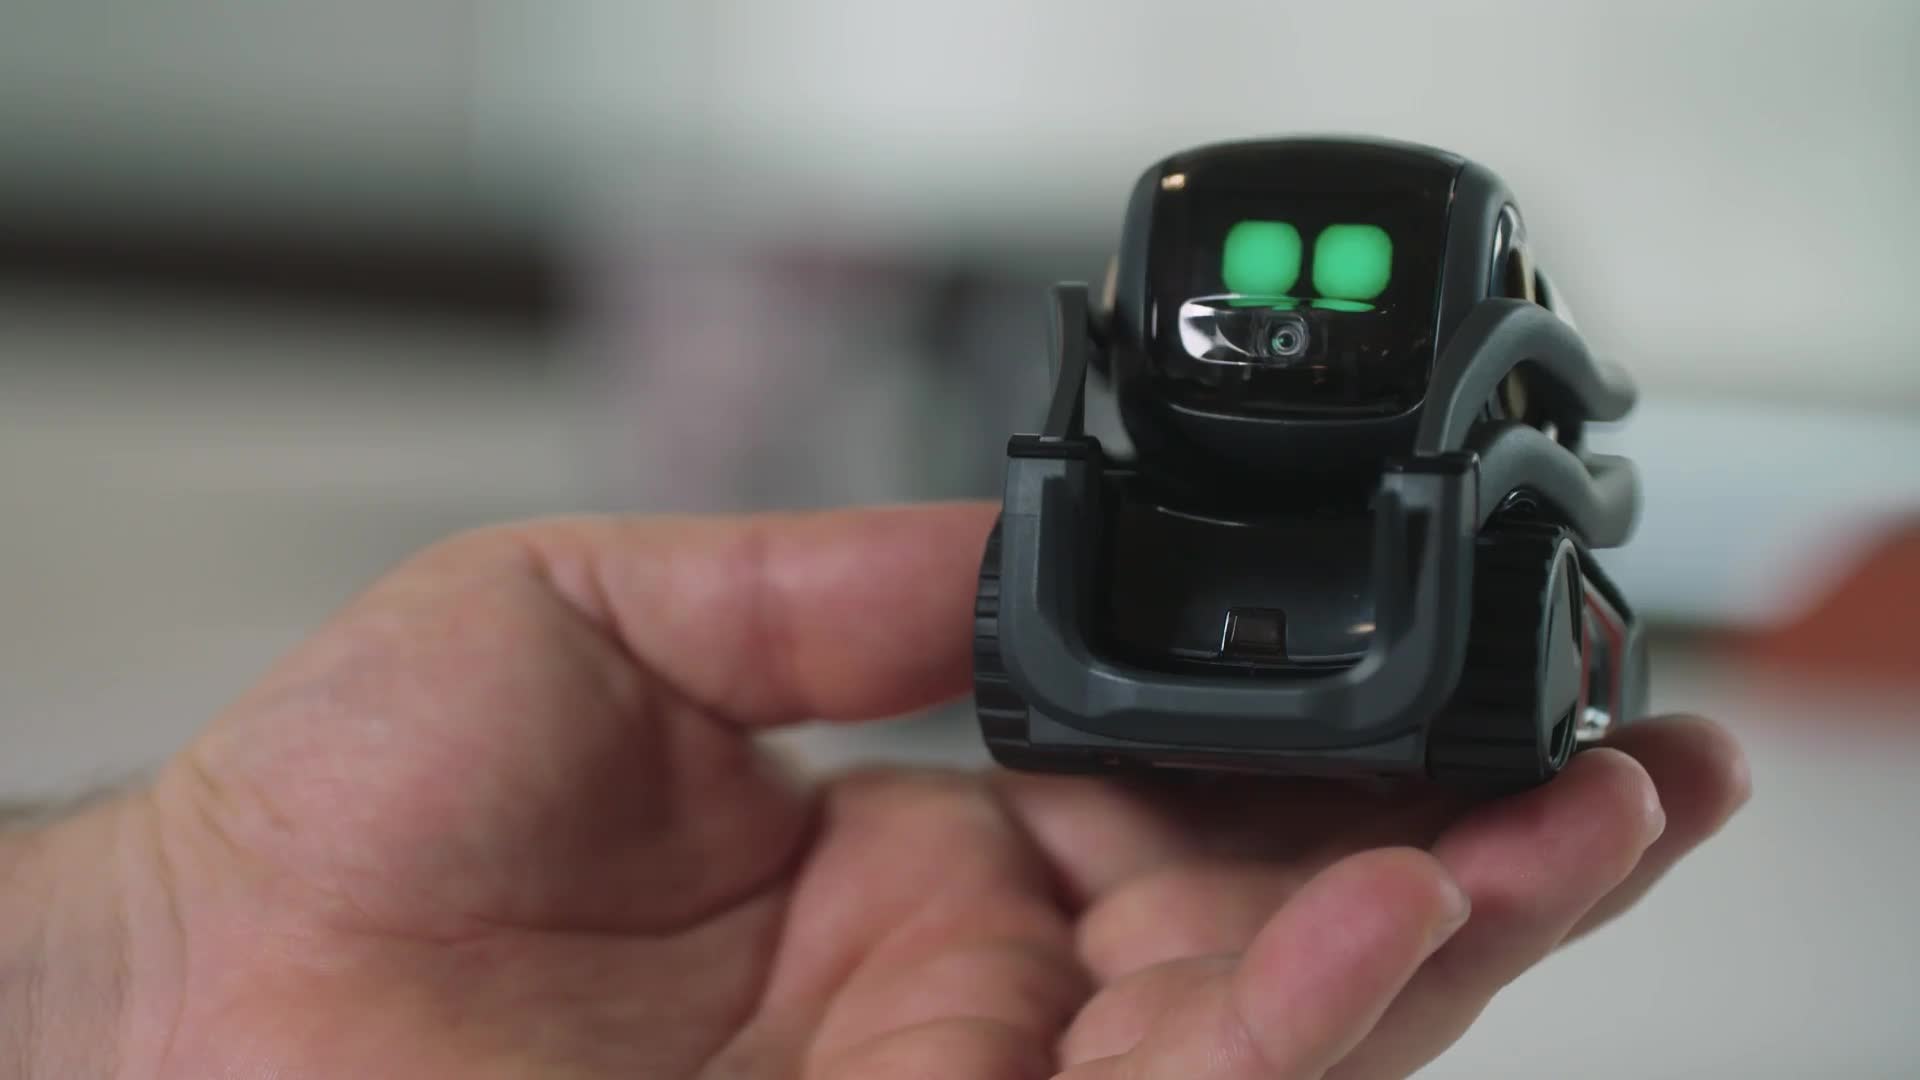 captain Watt linkage Watch Vector, Anki's New Home Robot Sure Is Cute. But Can It Survive? |  WIRED